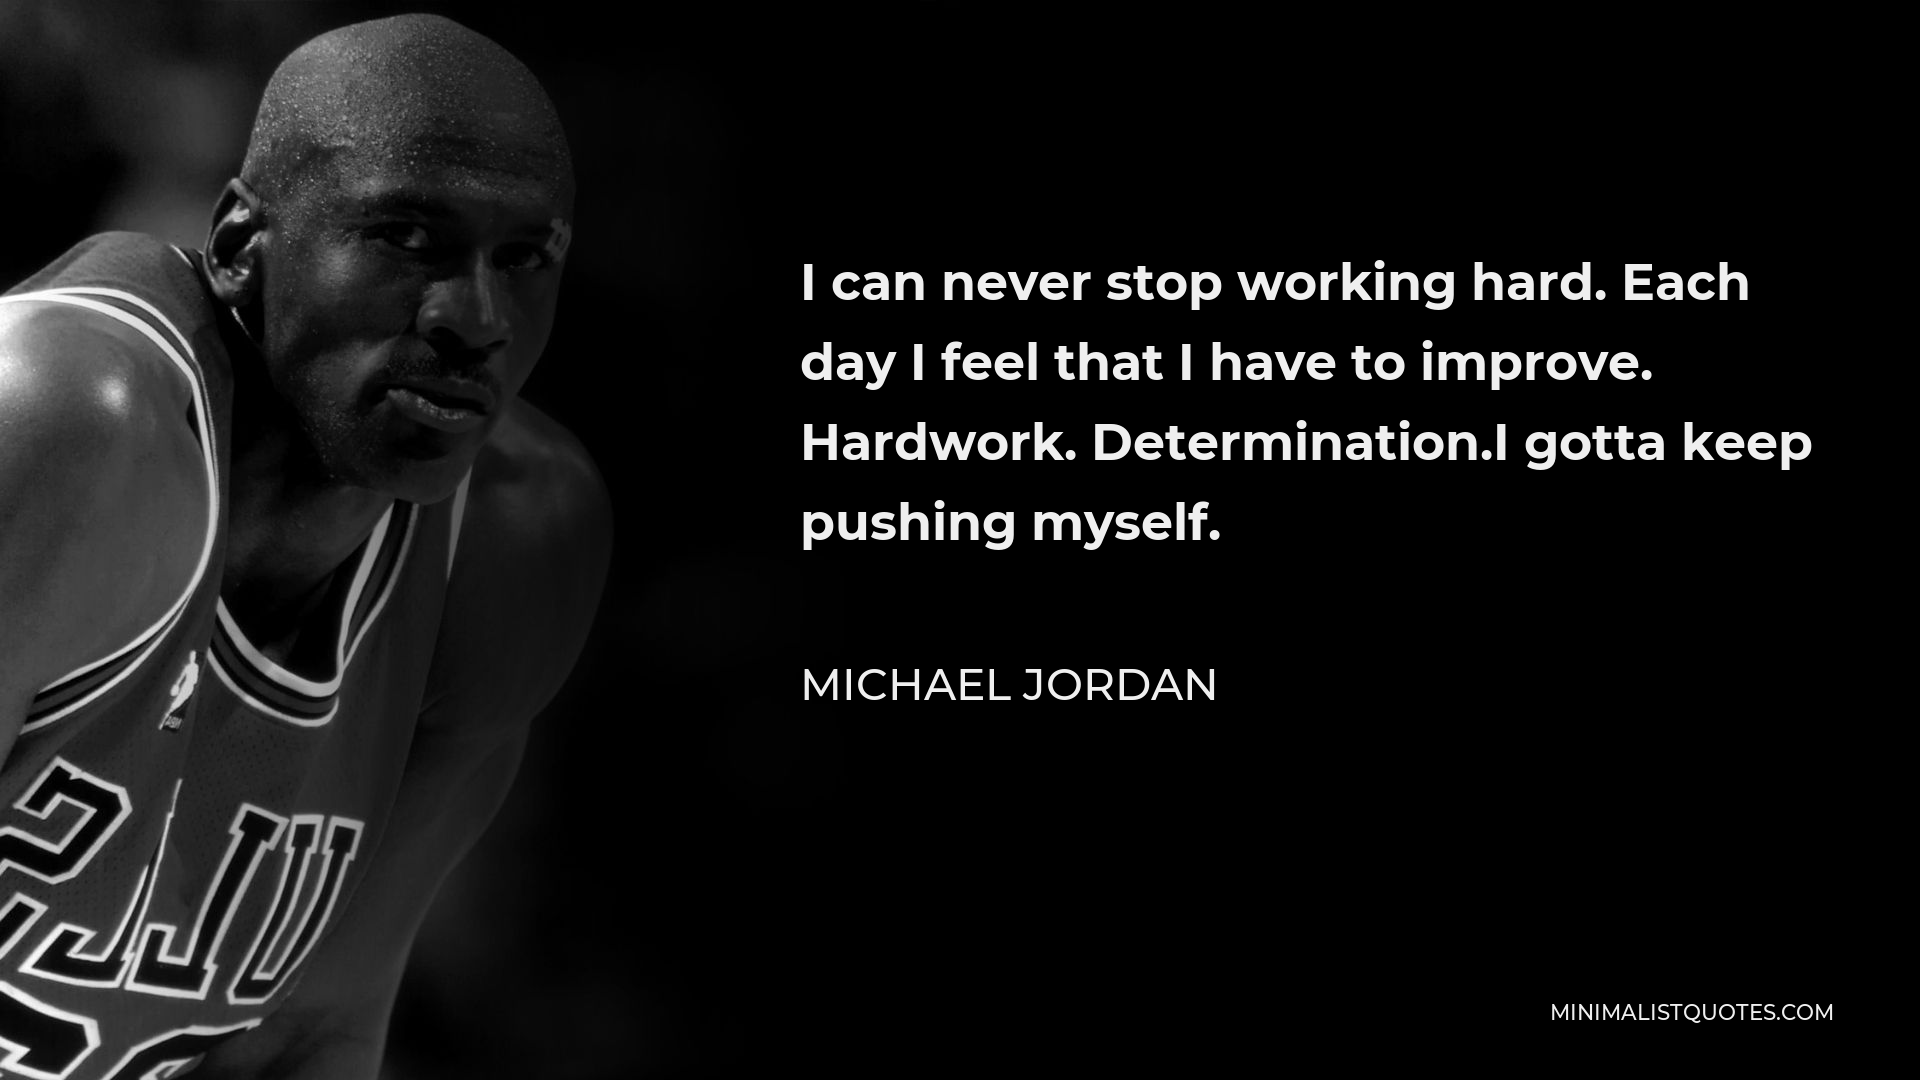 Michael Jordan Quote - I can never stop working hard. Each day I feel that I have to improve. Hardwork. Determination.I gotta keep pushing myself.